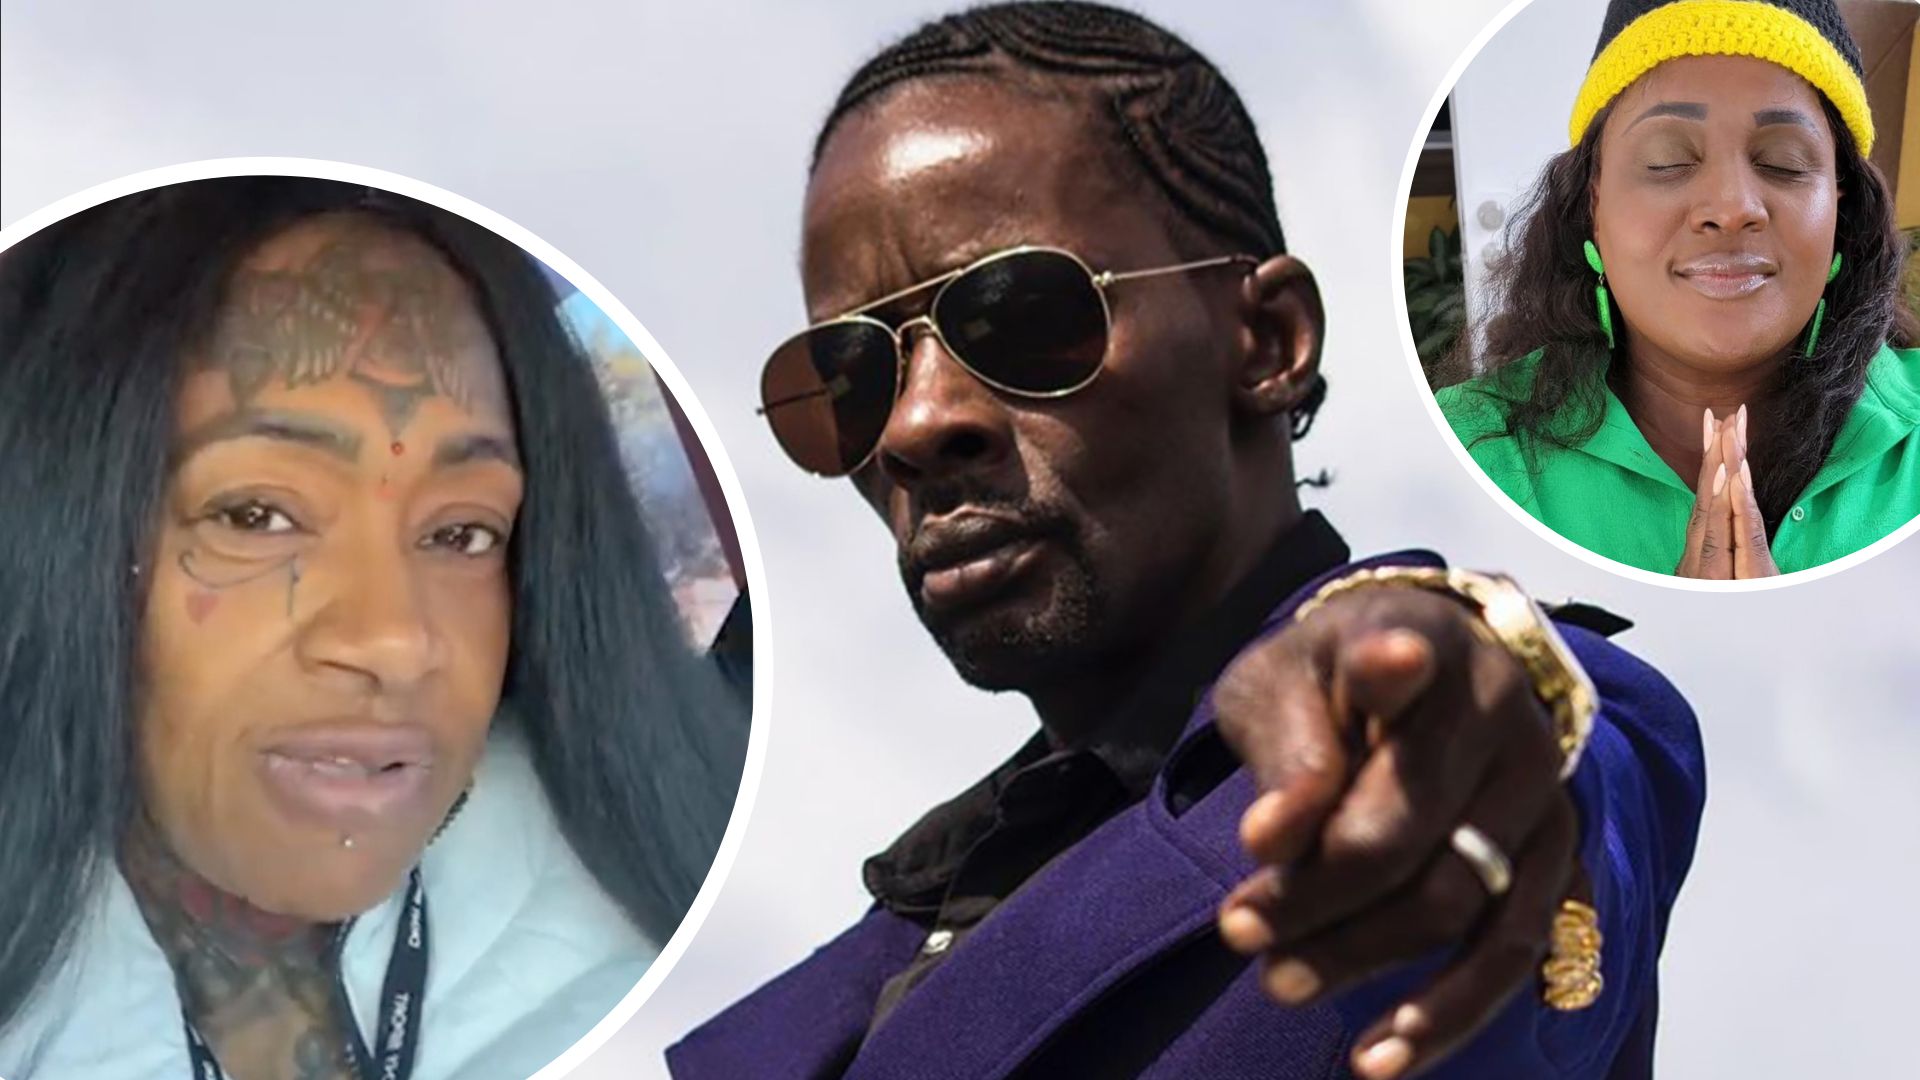 A'mari Bashes Gully Bop and Aunty Donna Amidst His Health Crisis and Explains Why - Watch Video